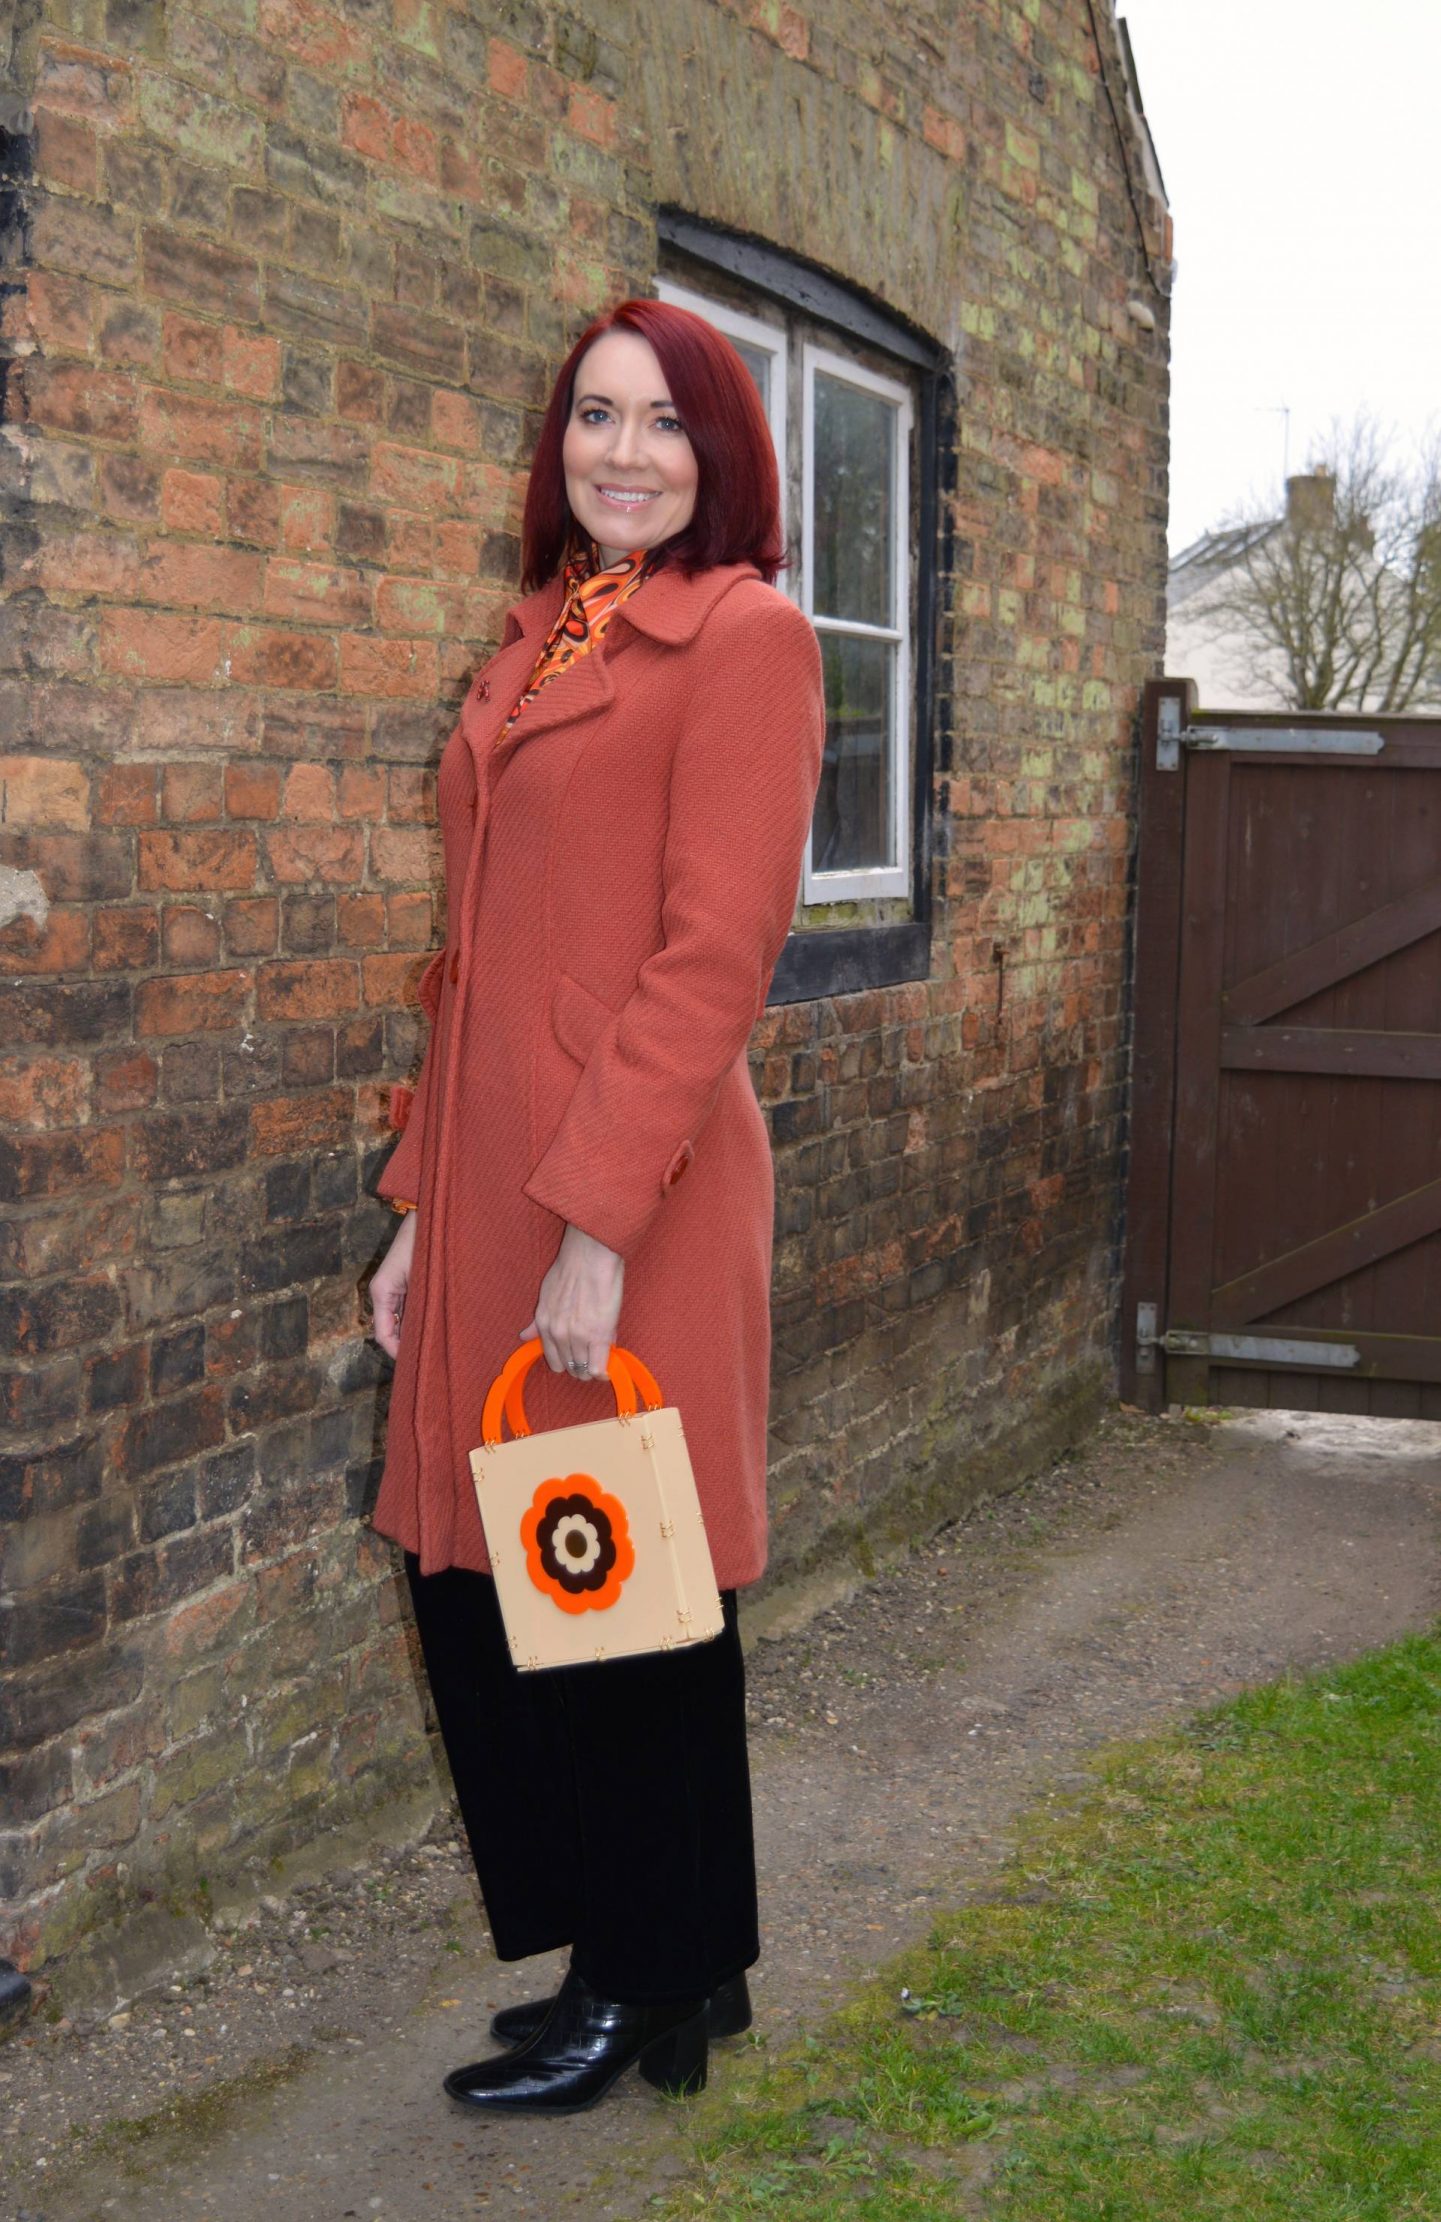 Wearing Our Everyday Luxe, The Hippie Shake shirt, Wallis orange coat, Ada Binks bag, Very black velvet trousers, Marks & Spencer black square toe ankle boots